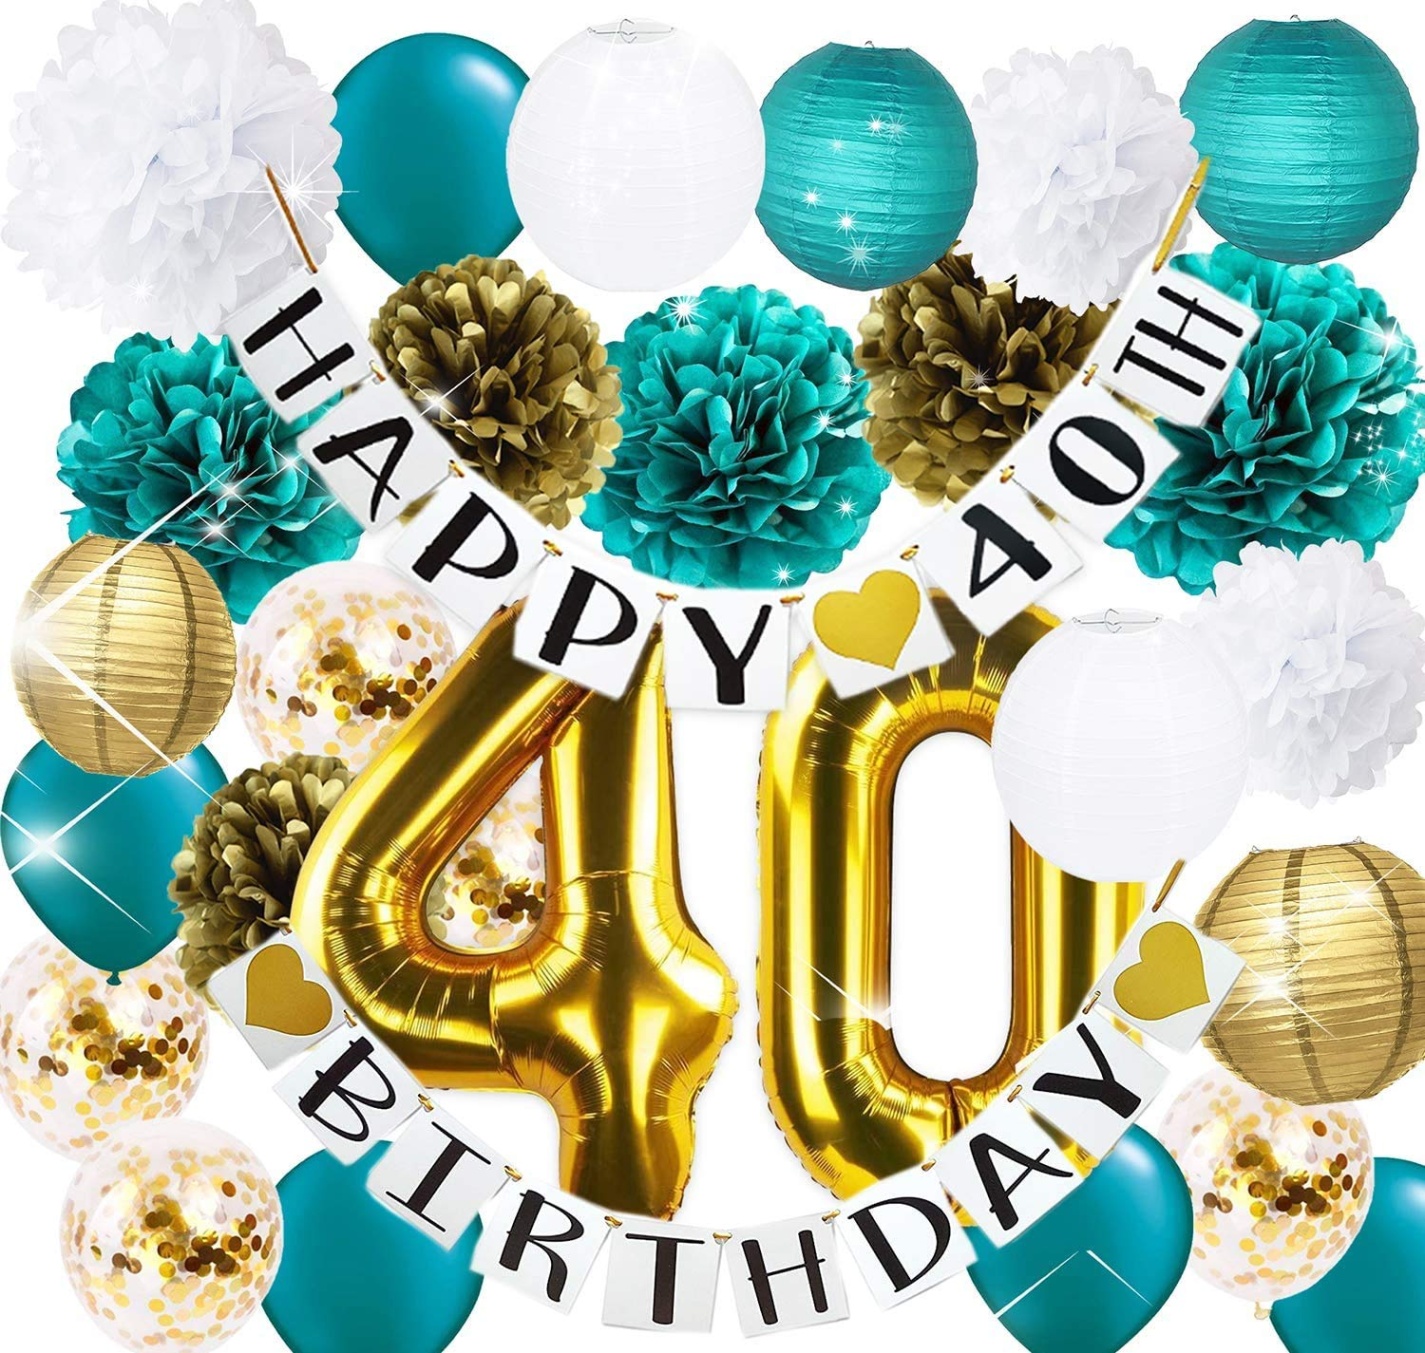 40th birthday decorations woman Bulan 1 th Birthday Decorations for Women Teal Gold Confetti Latex Balloons  Tissue Pom Poms Gold Teal  Birthday Decoration Happy th Birthday Party  Forty